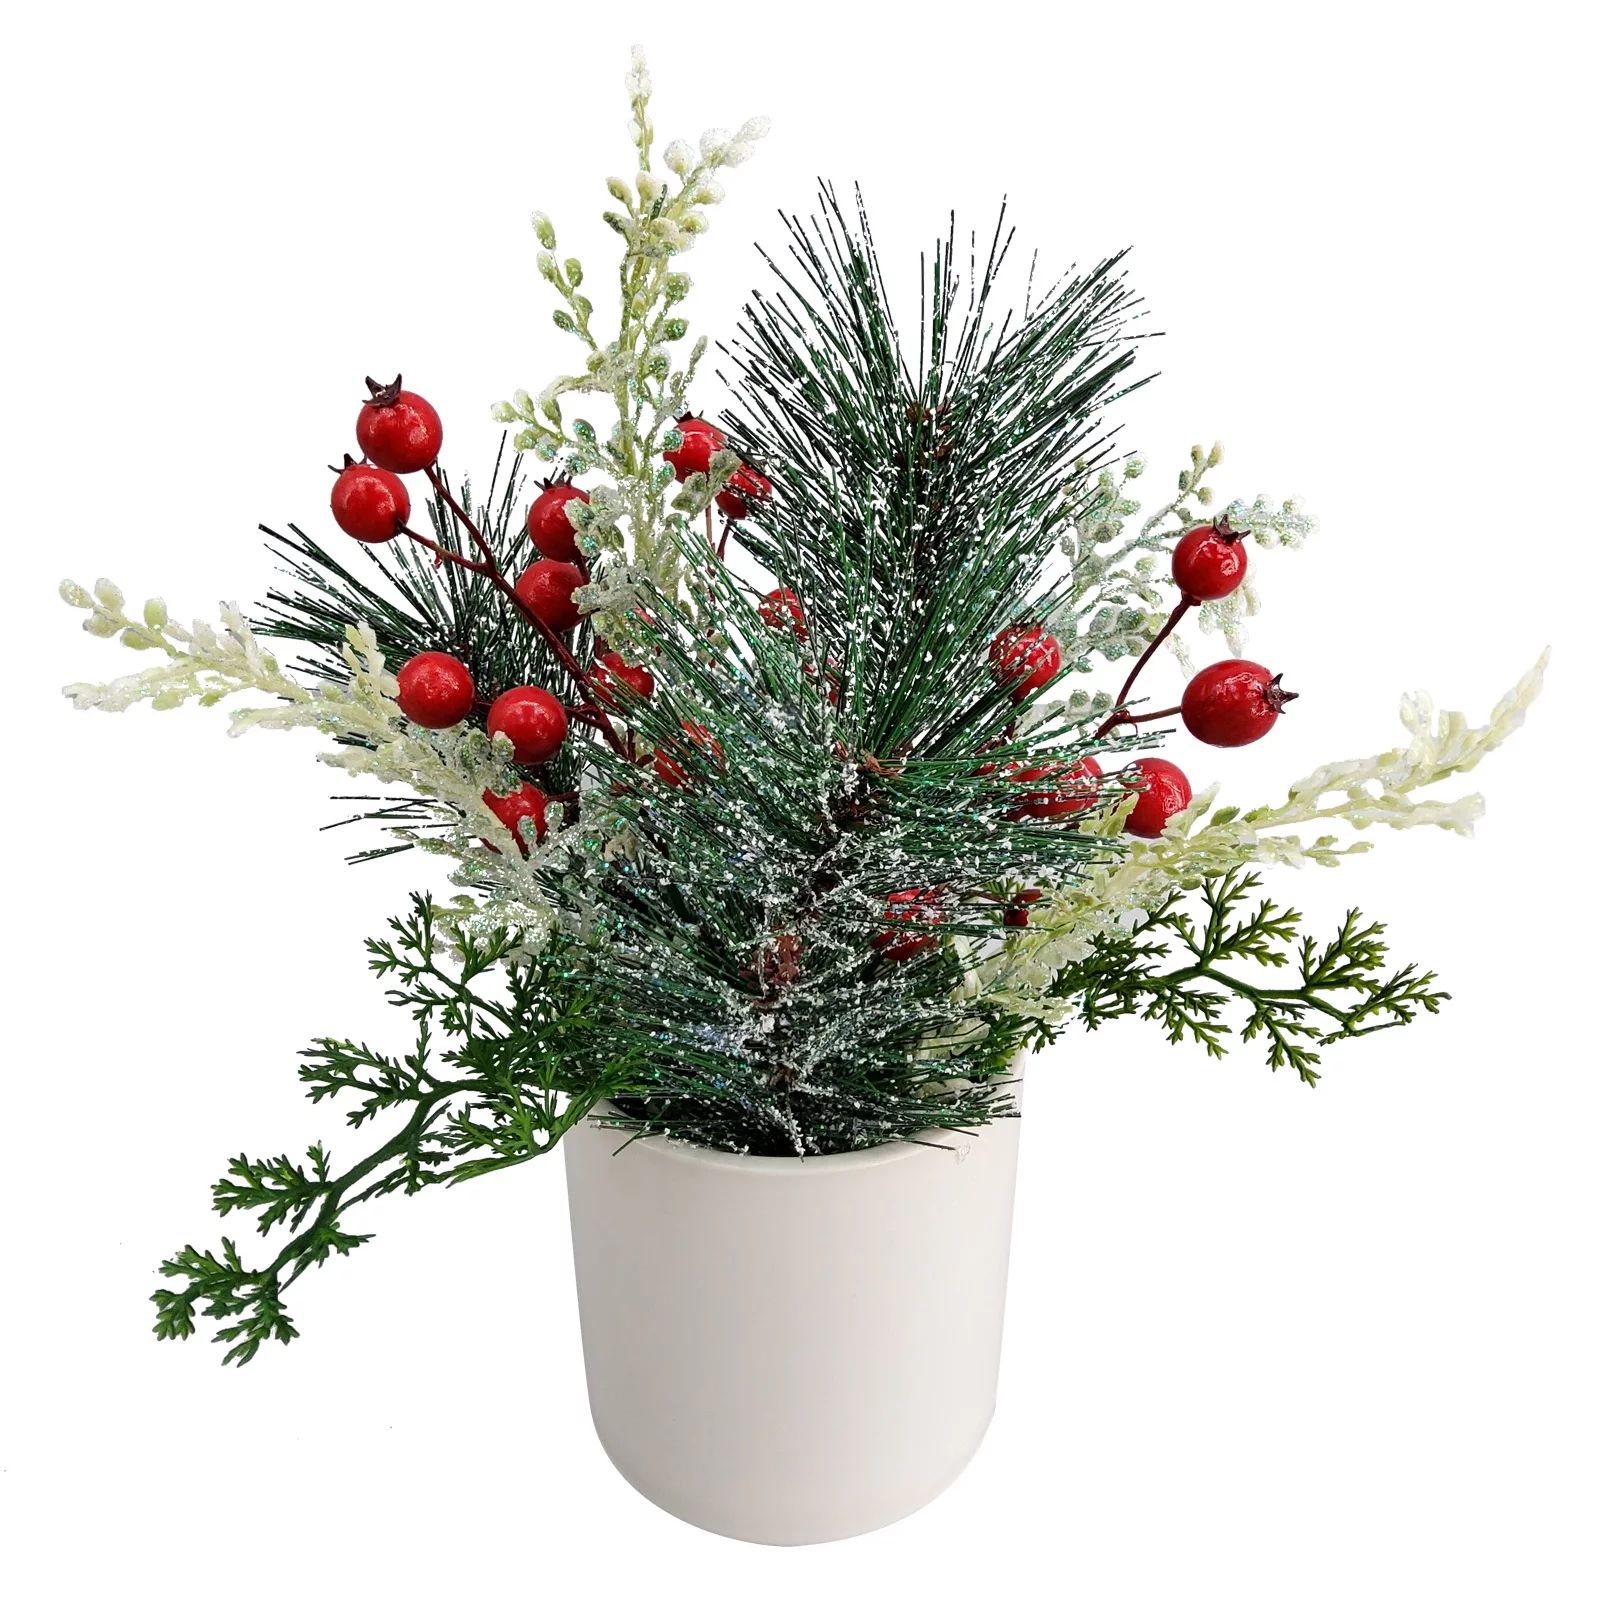 Mainstays 10.5" Artificial Pine Tree in Pot with Berry | Walmart (US)